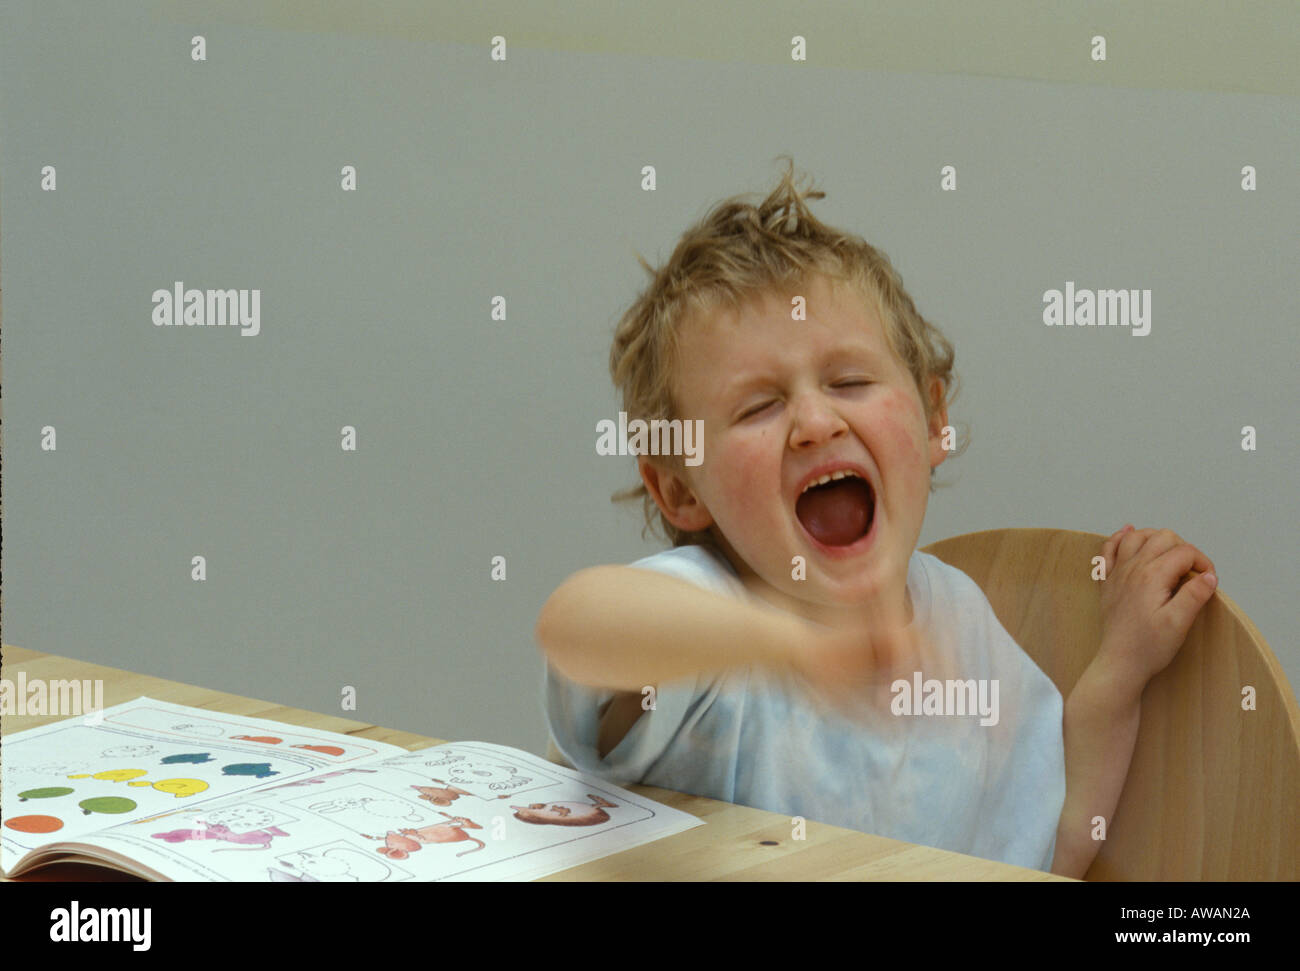 young boy shouting and waving his hands Stock Photo